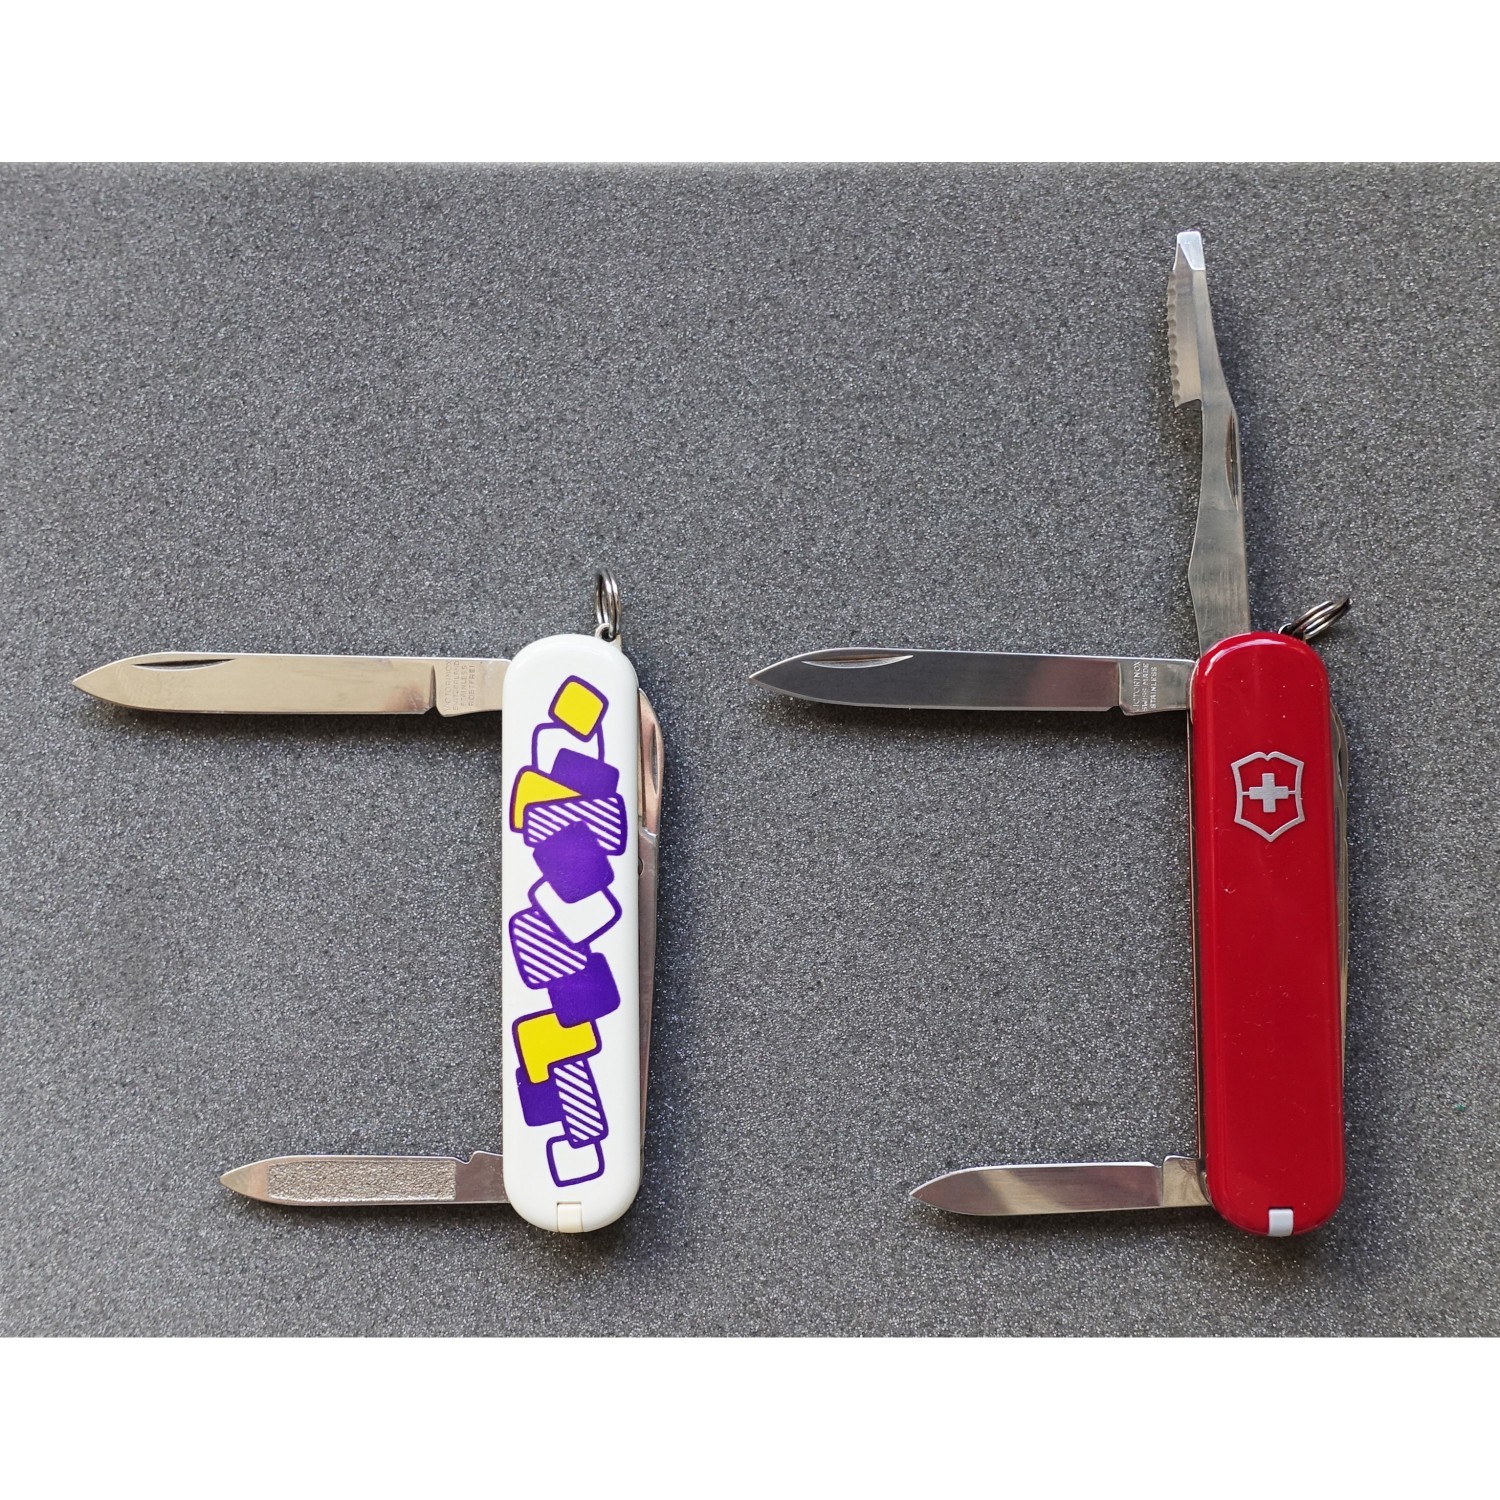  Victorinox 0.6386.WL Midnight Mini Champ Knife, Former Name:  Mini Champ Light WL, Authentic Japanese Product Warranty : Sports & Outdoors